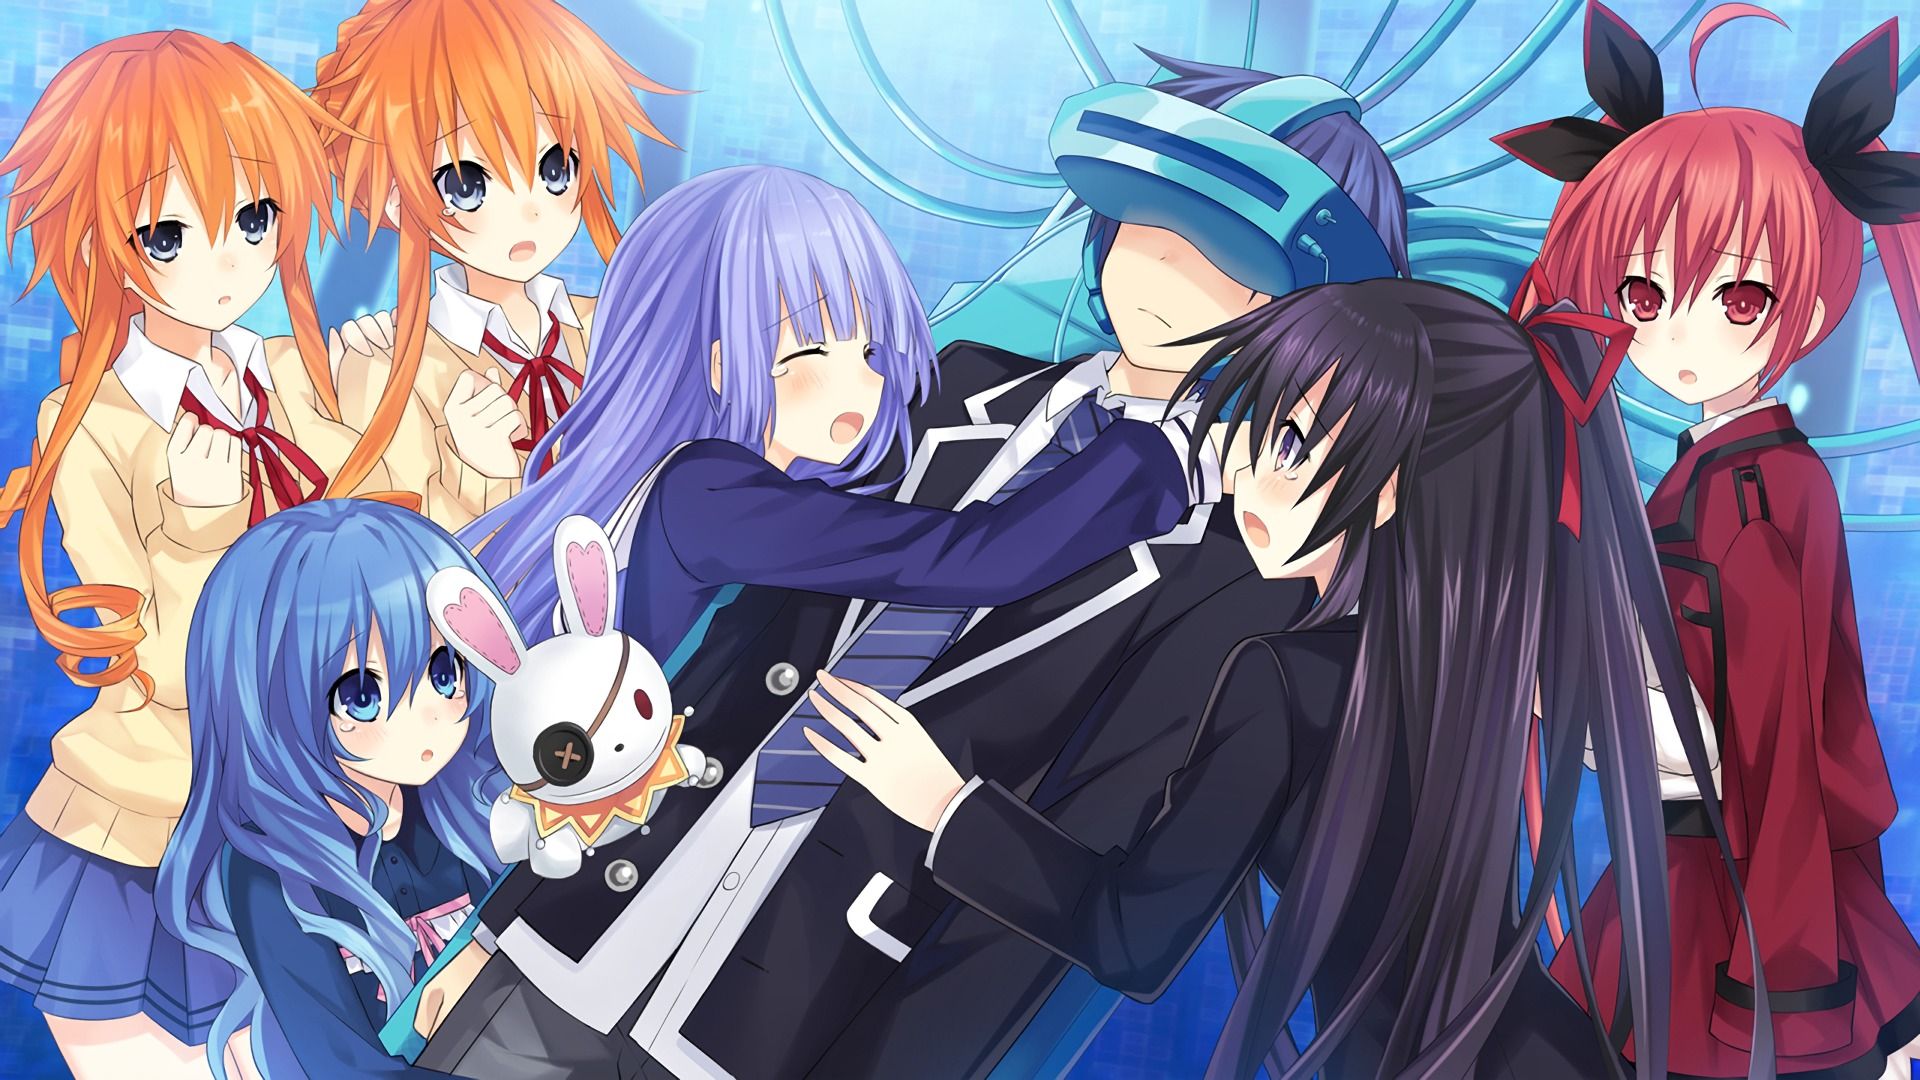 Download wallpaper from anime Date A Live with tags: MacBook Pro